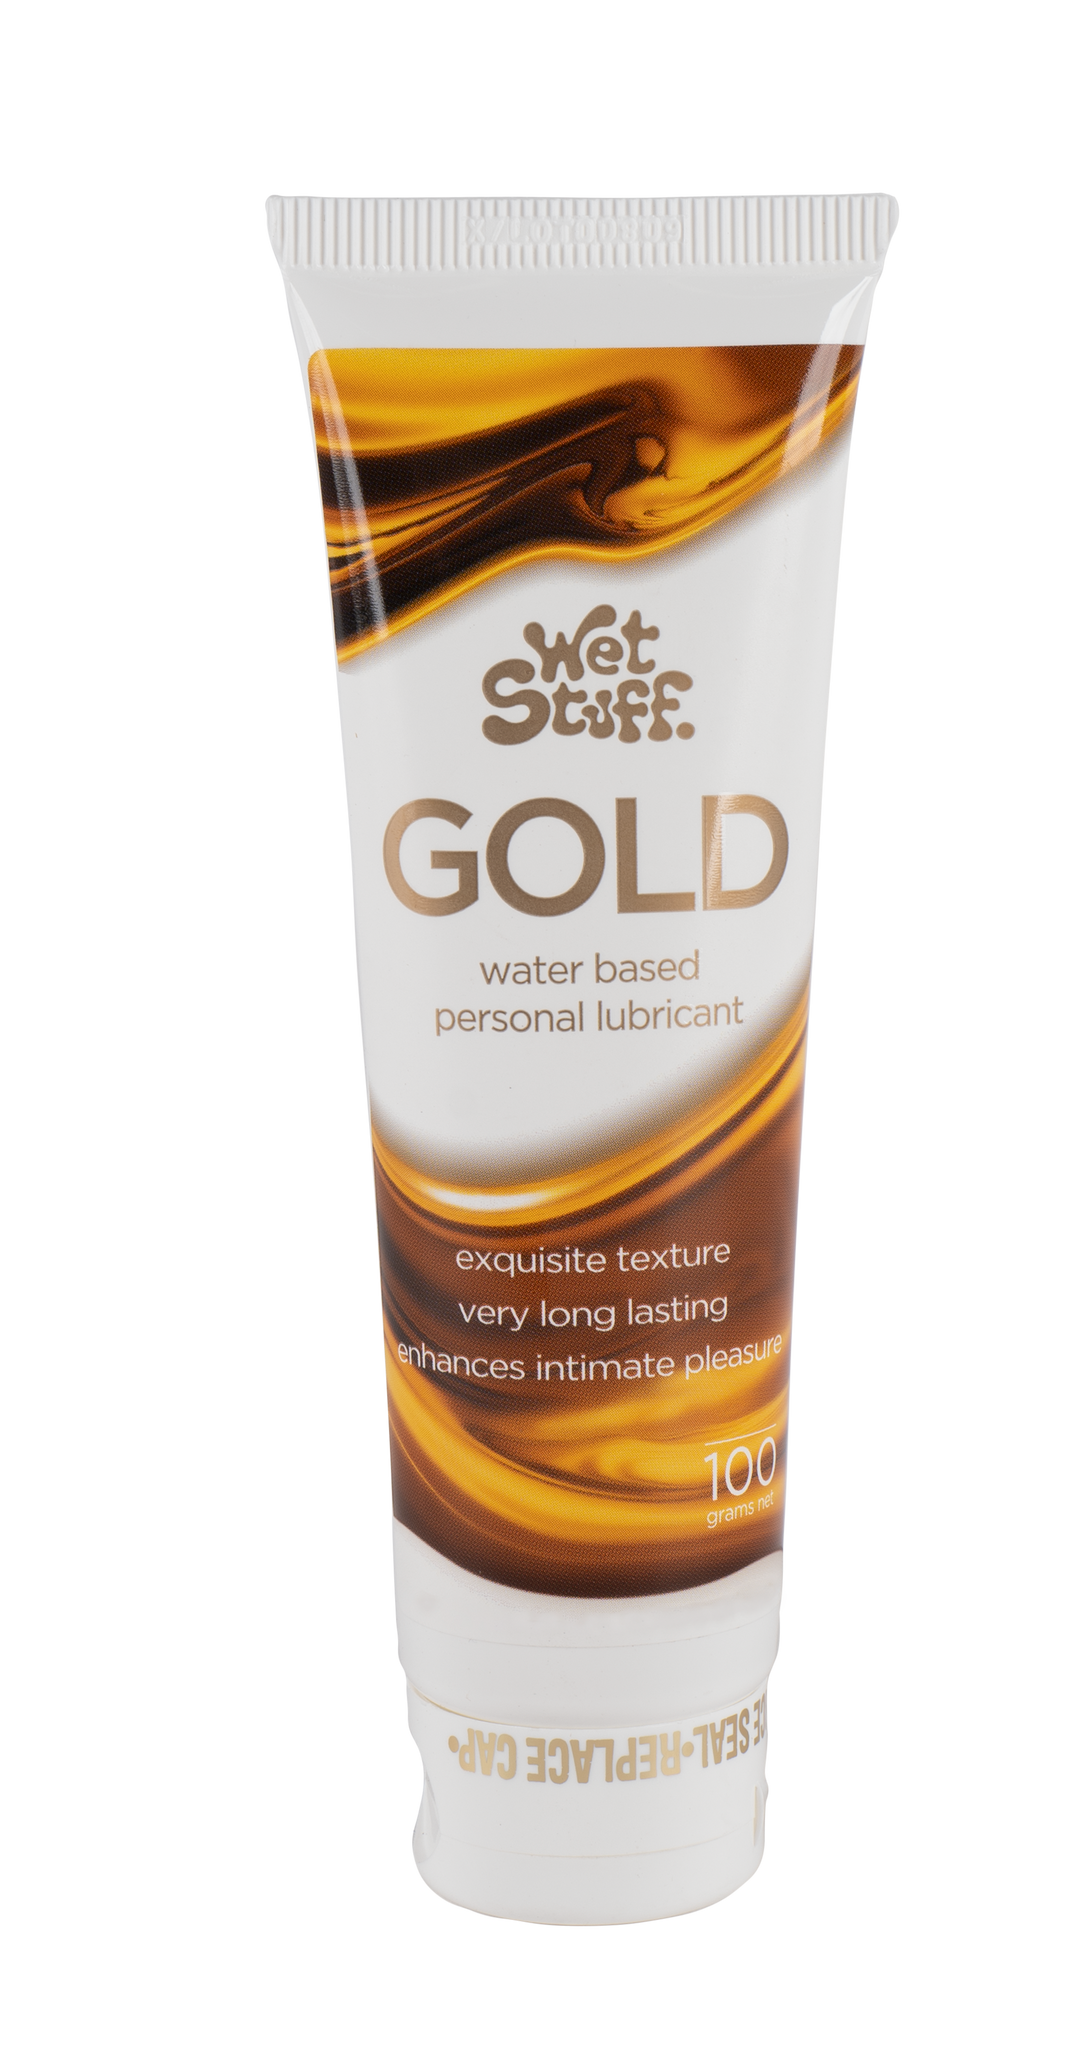  Wet Stuff Gold lubricant water based